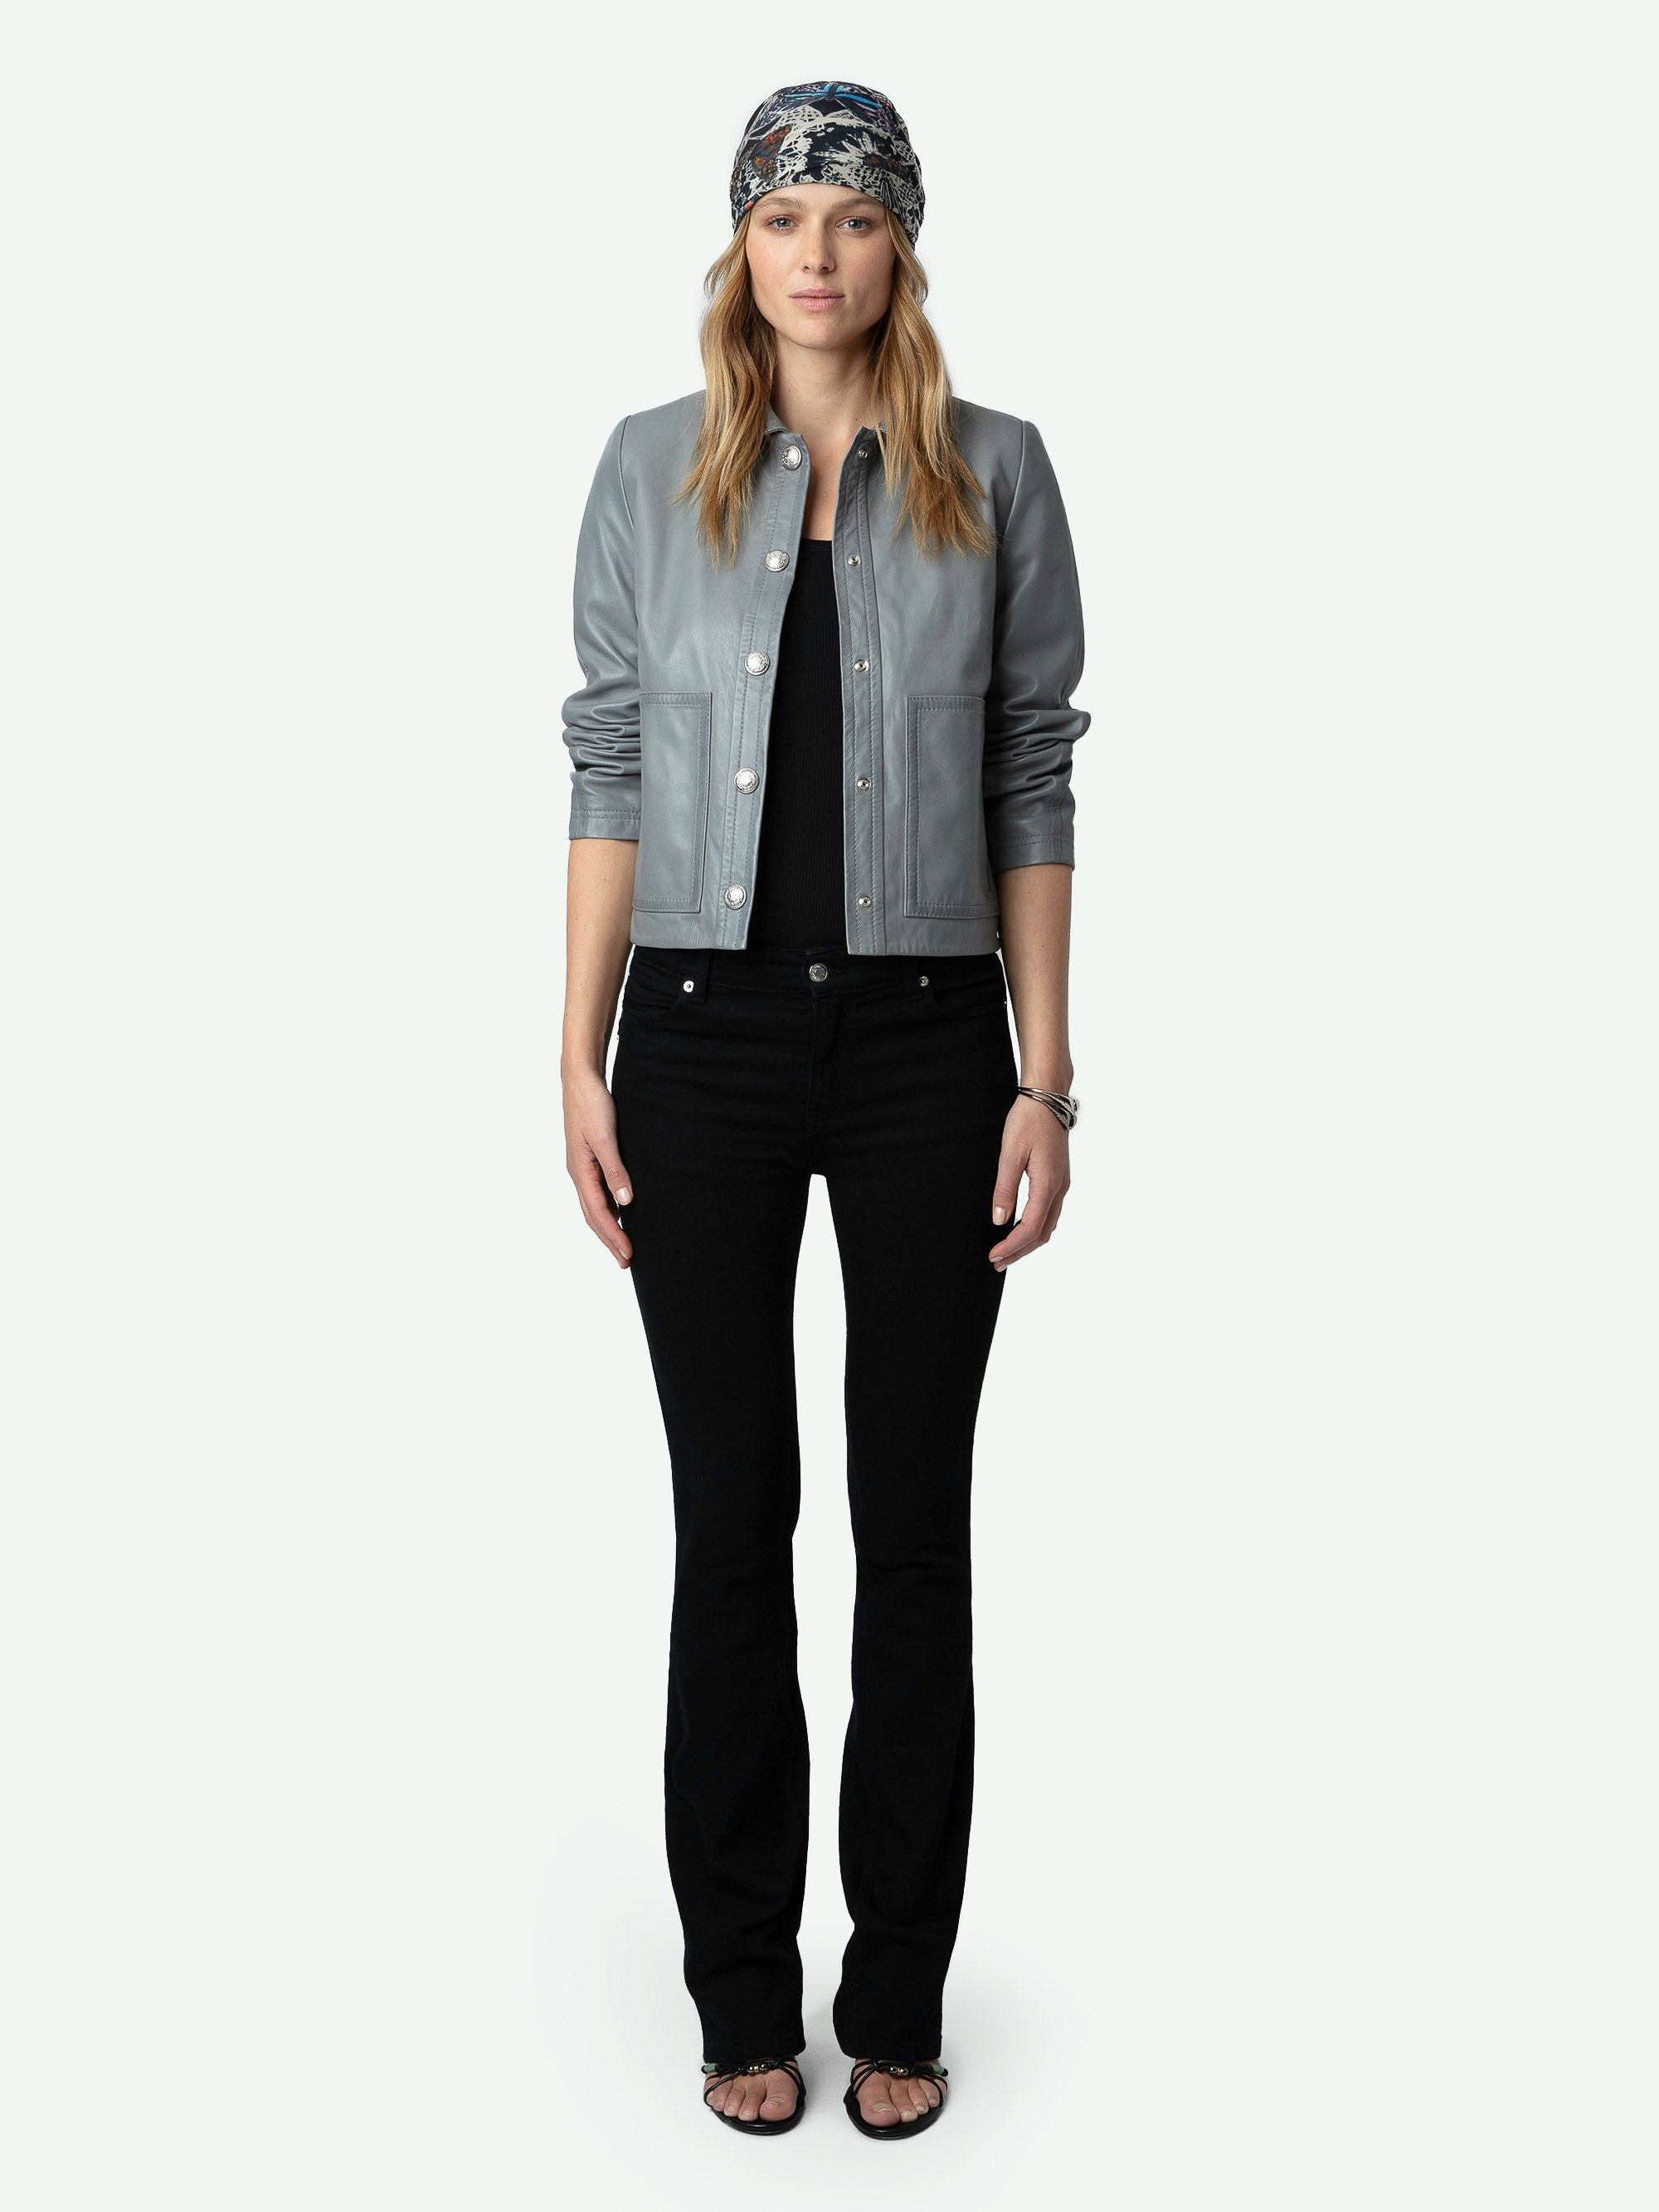 Litchi Leather Jacket - Long-sleeved grey smooth leather button-up cropped jacket with pockets and cut-outs.